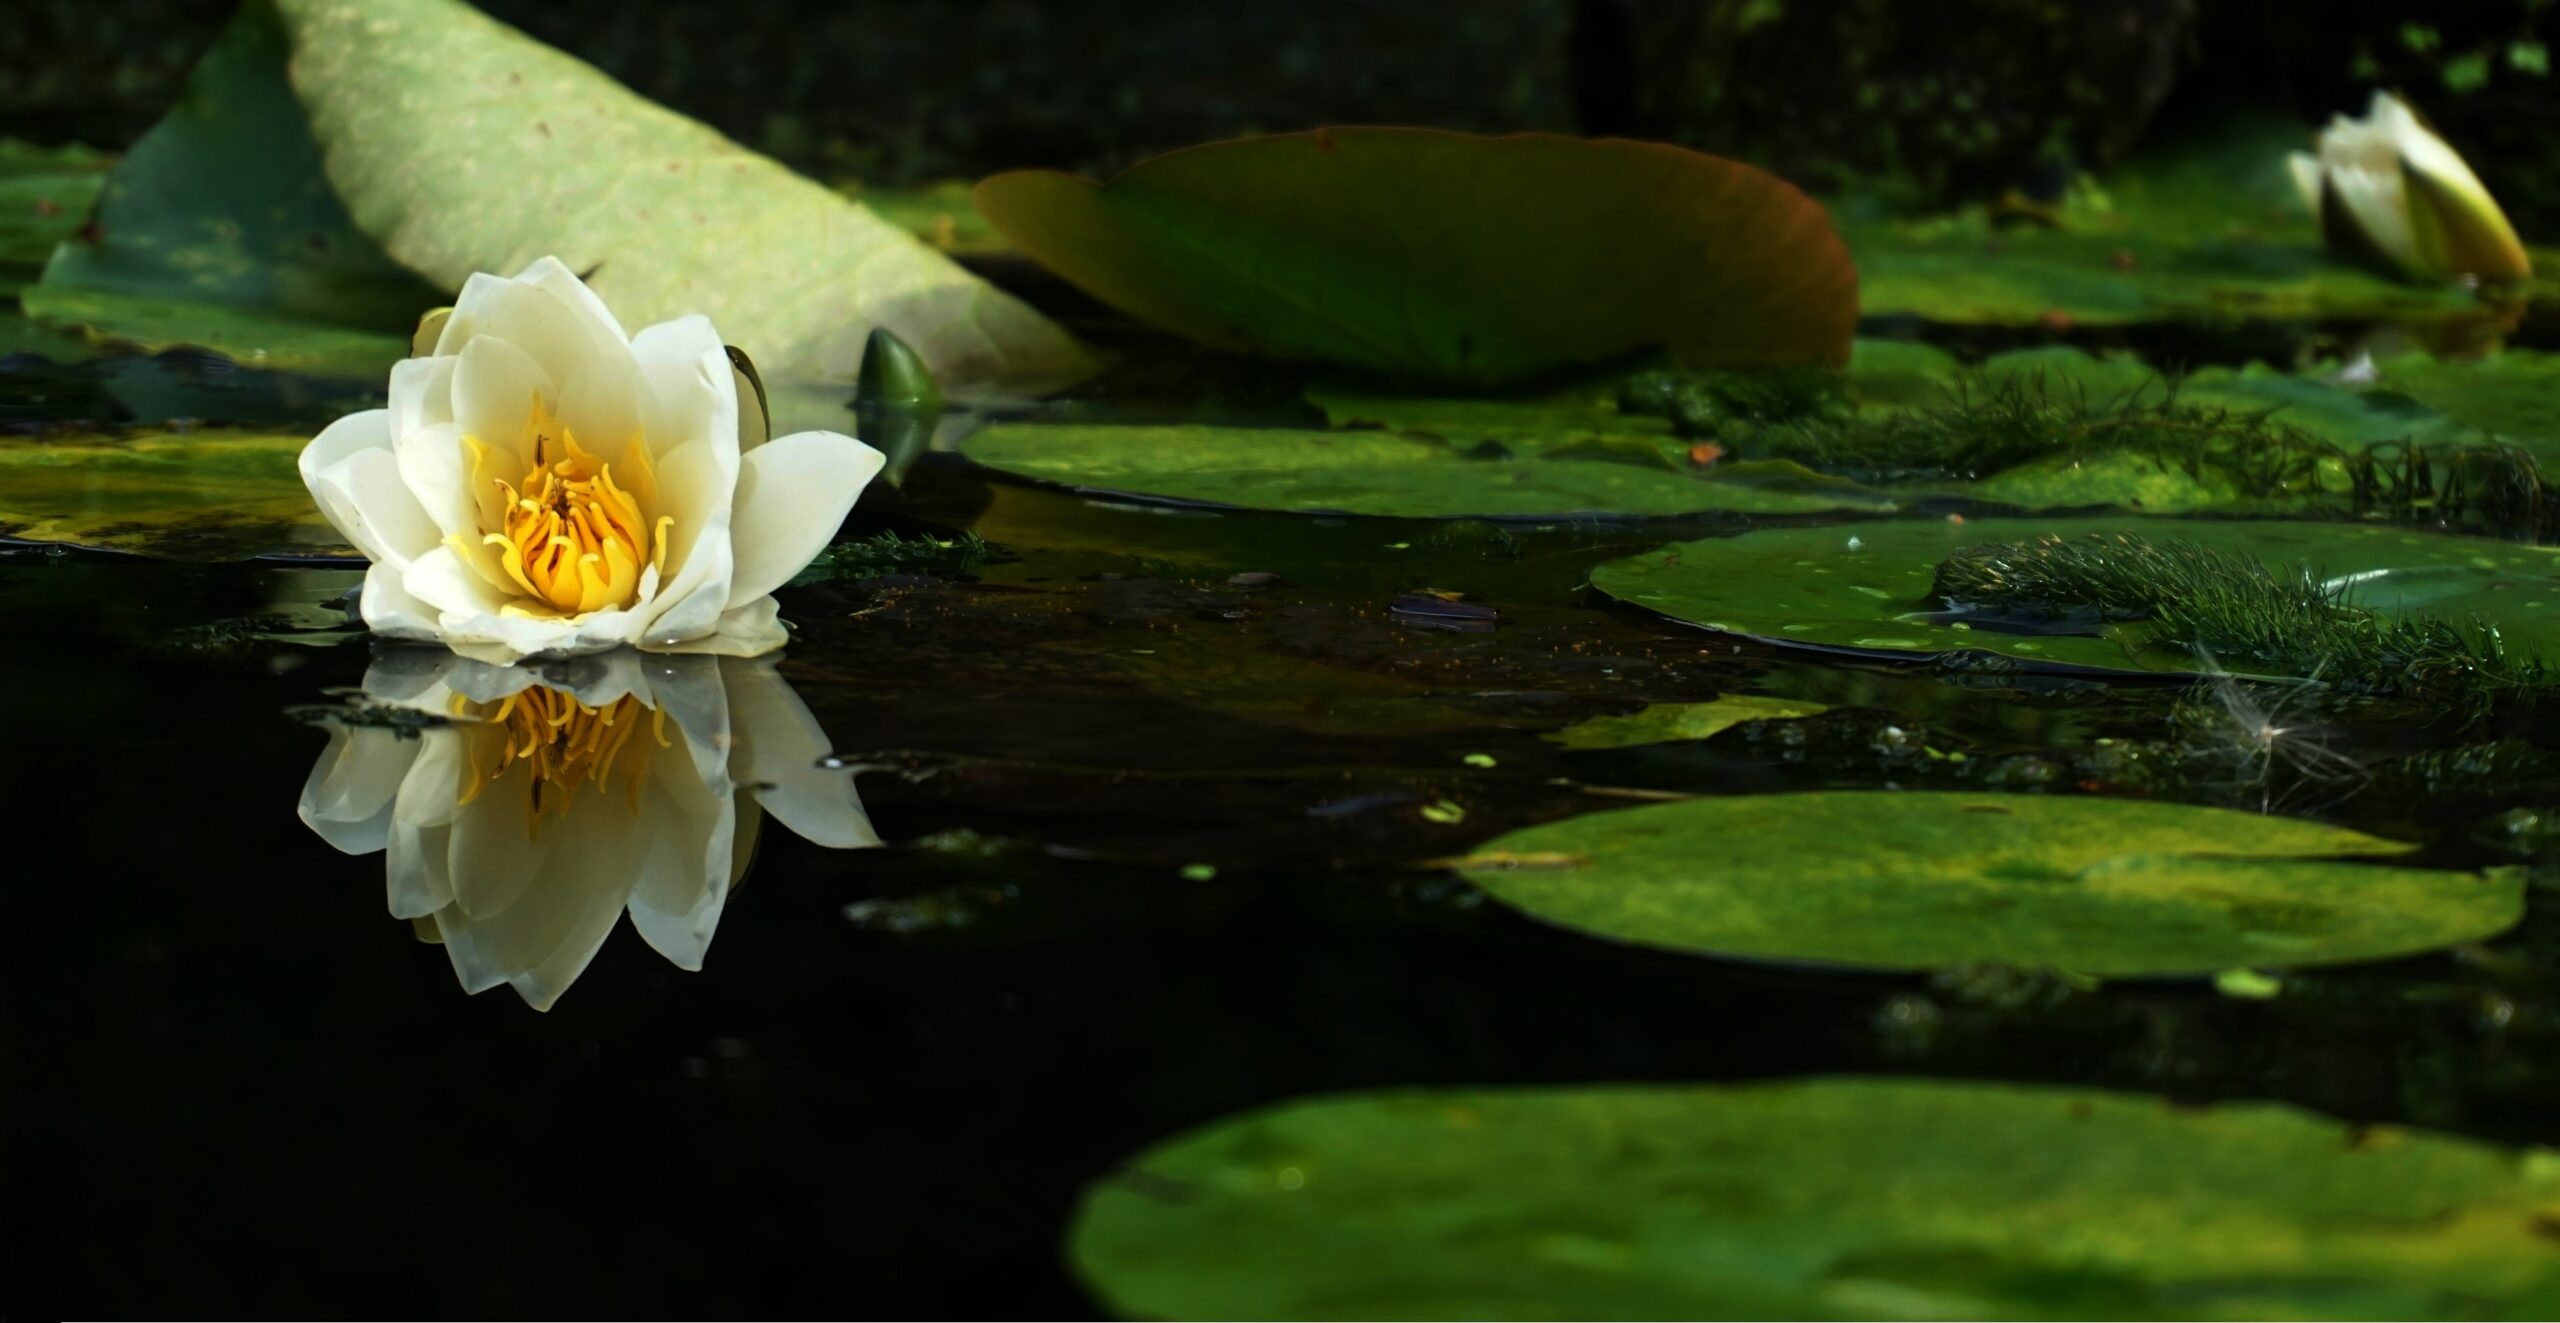 Flower on surface of a pond